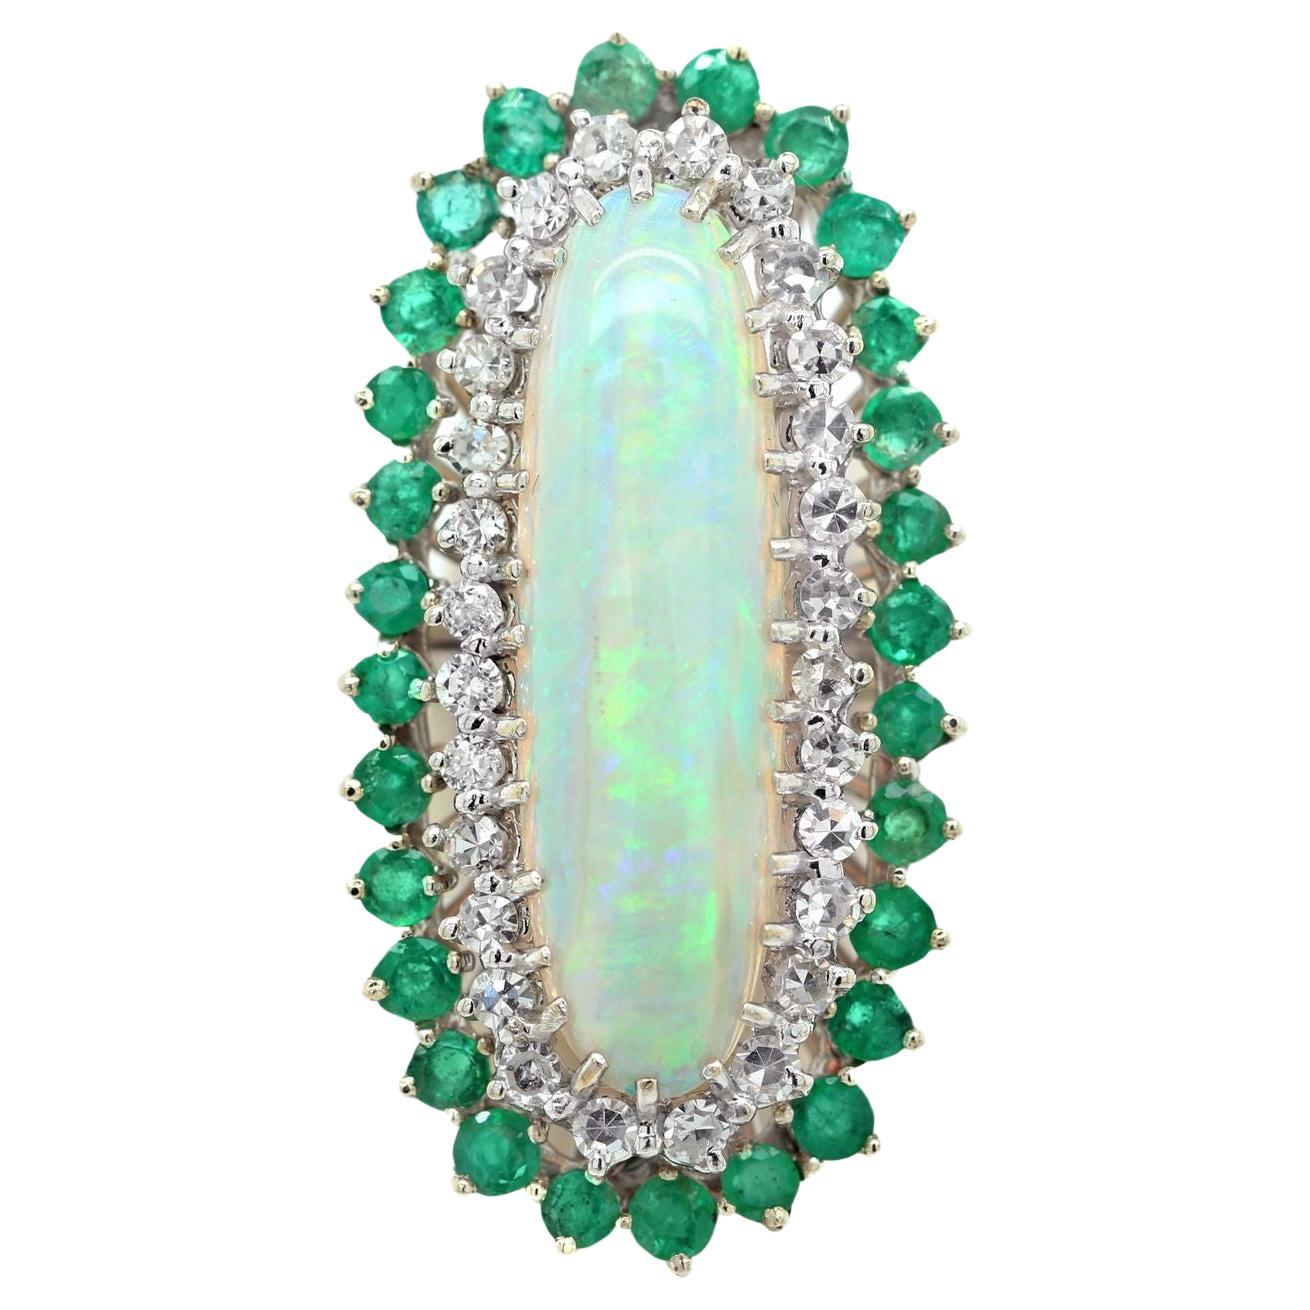 Diana M. 18 kt white gold opal, emerald, and diamond ring featuring a 7.00 ct 